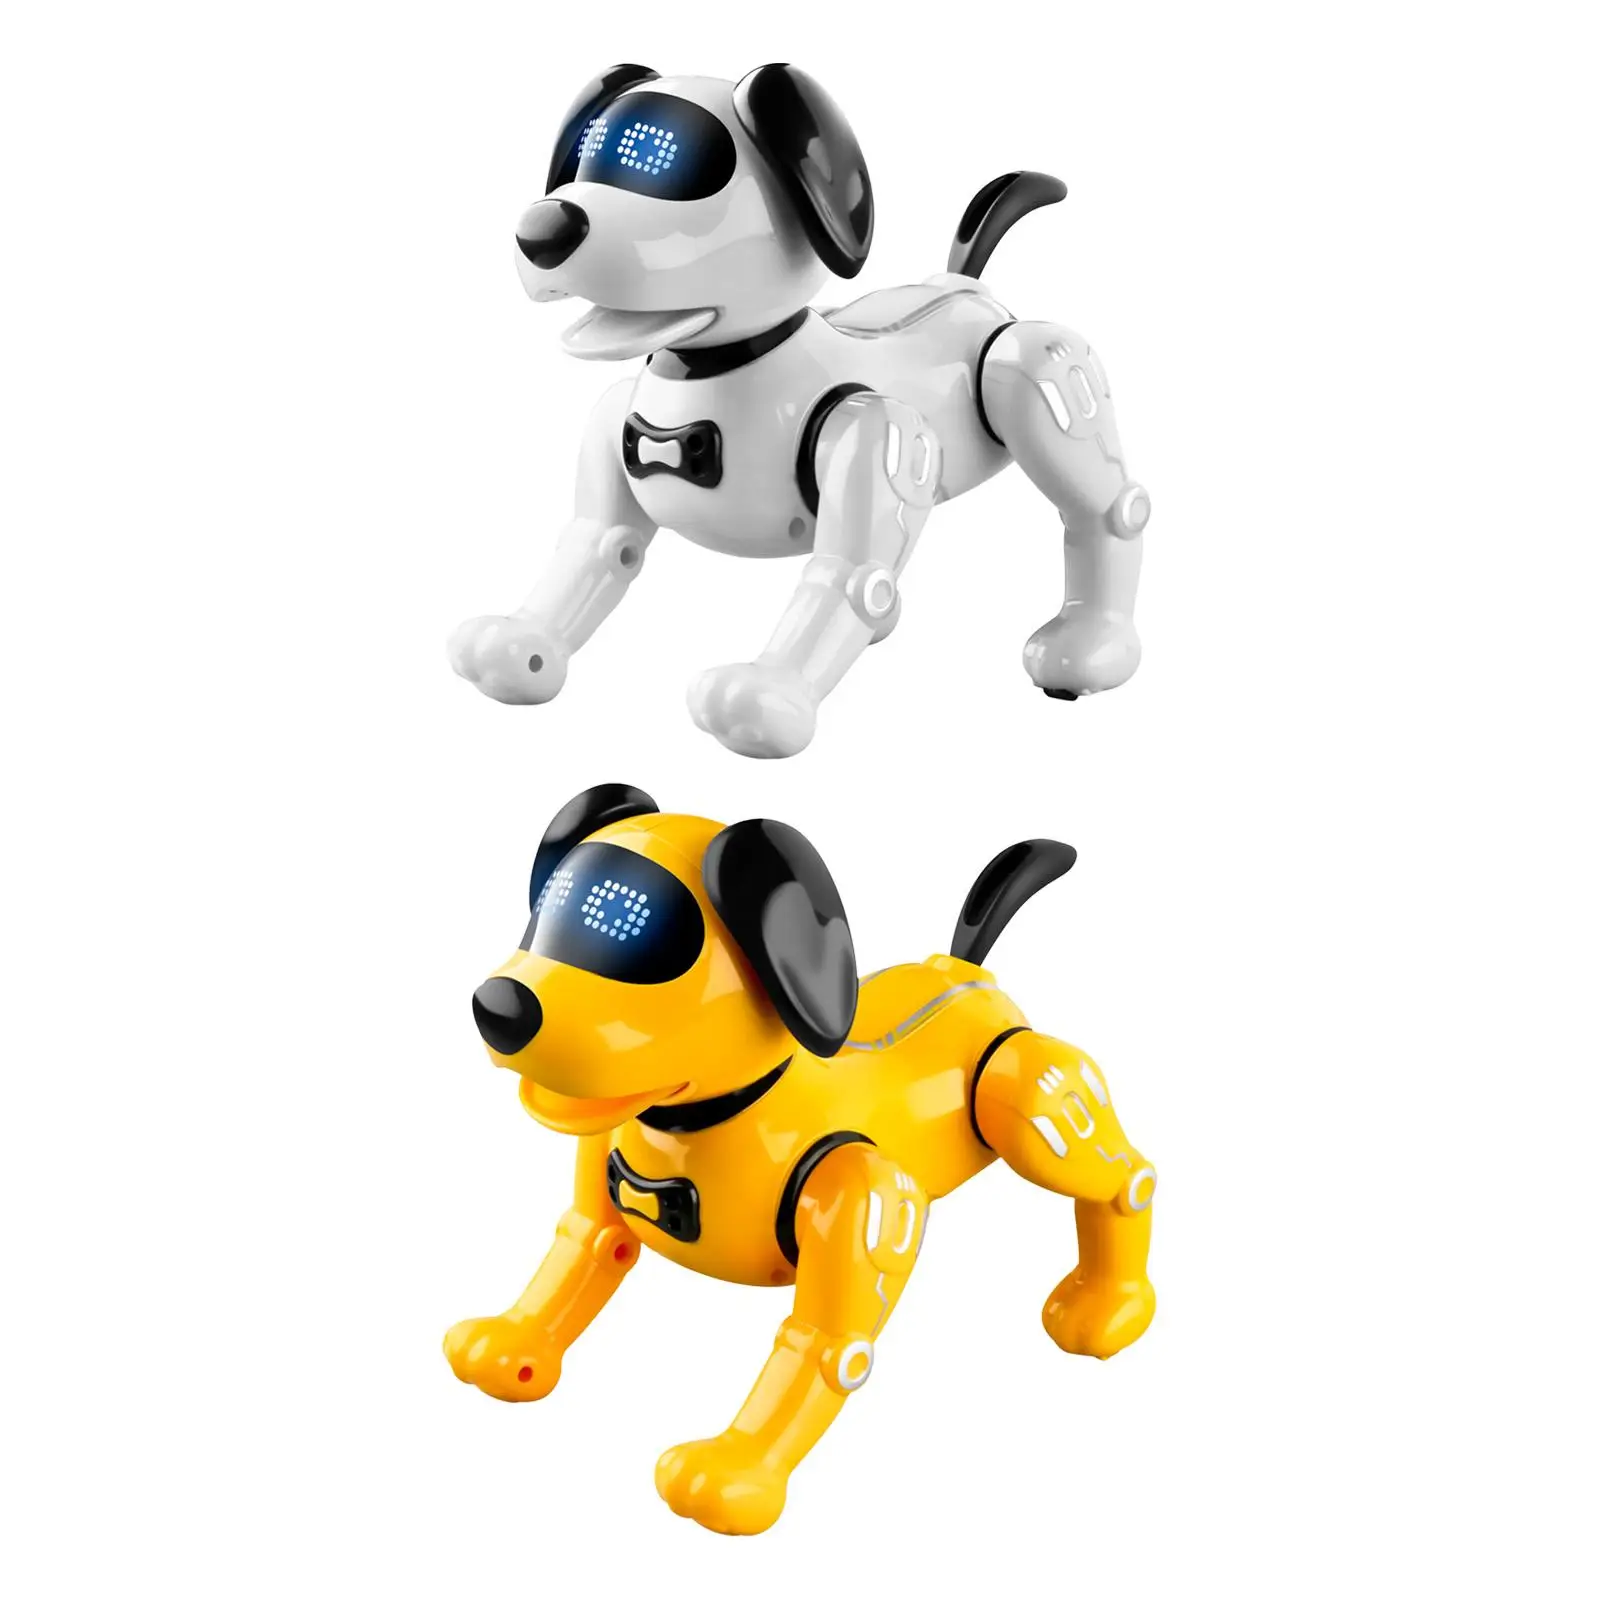 Remote Control Robot Dog Toy Puppy for Boys and Girls Age 5 6 7 8 9 10